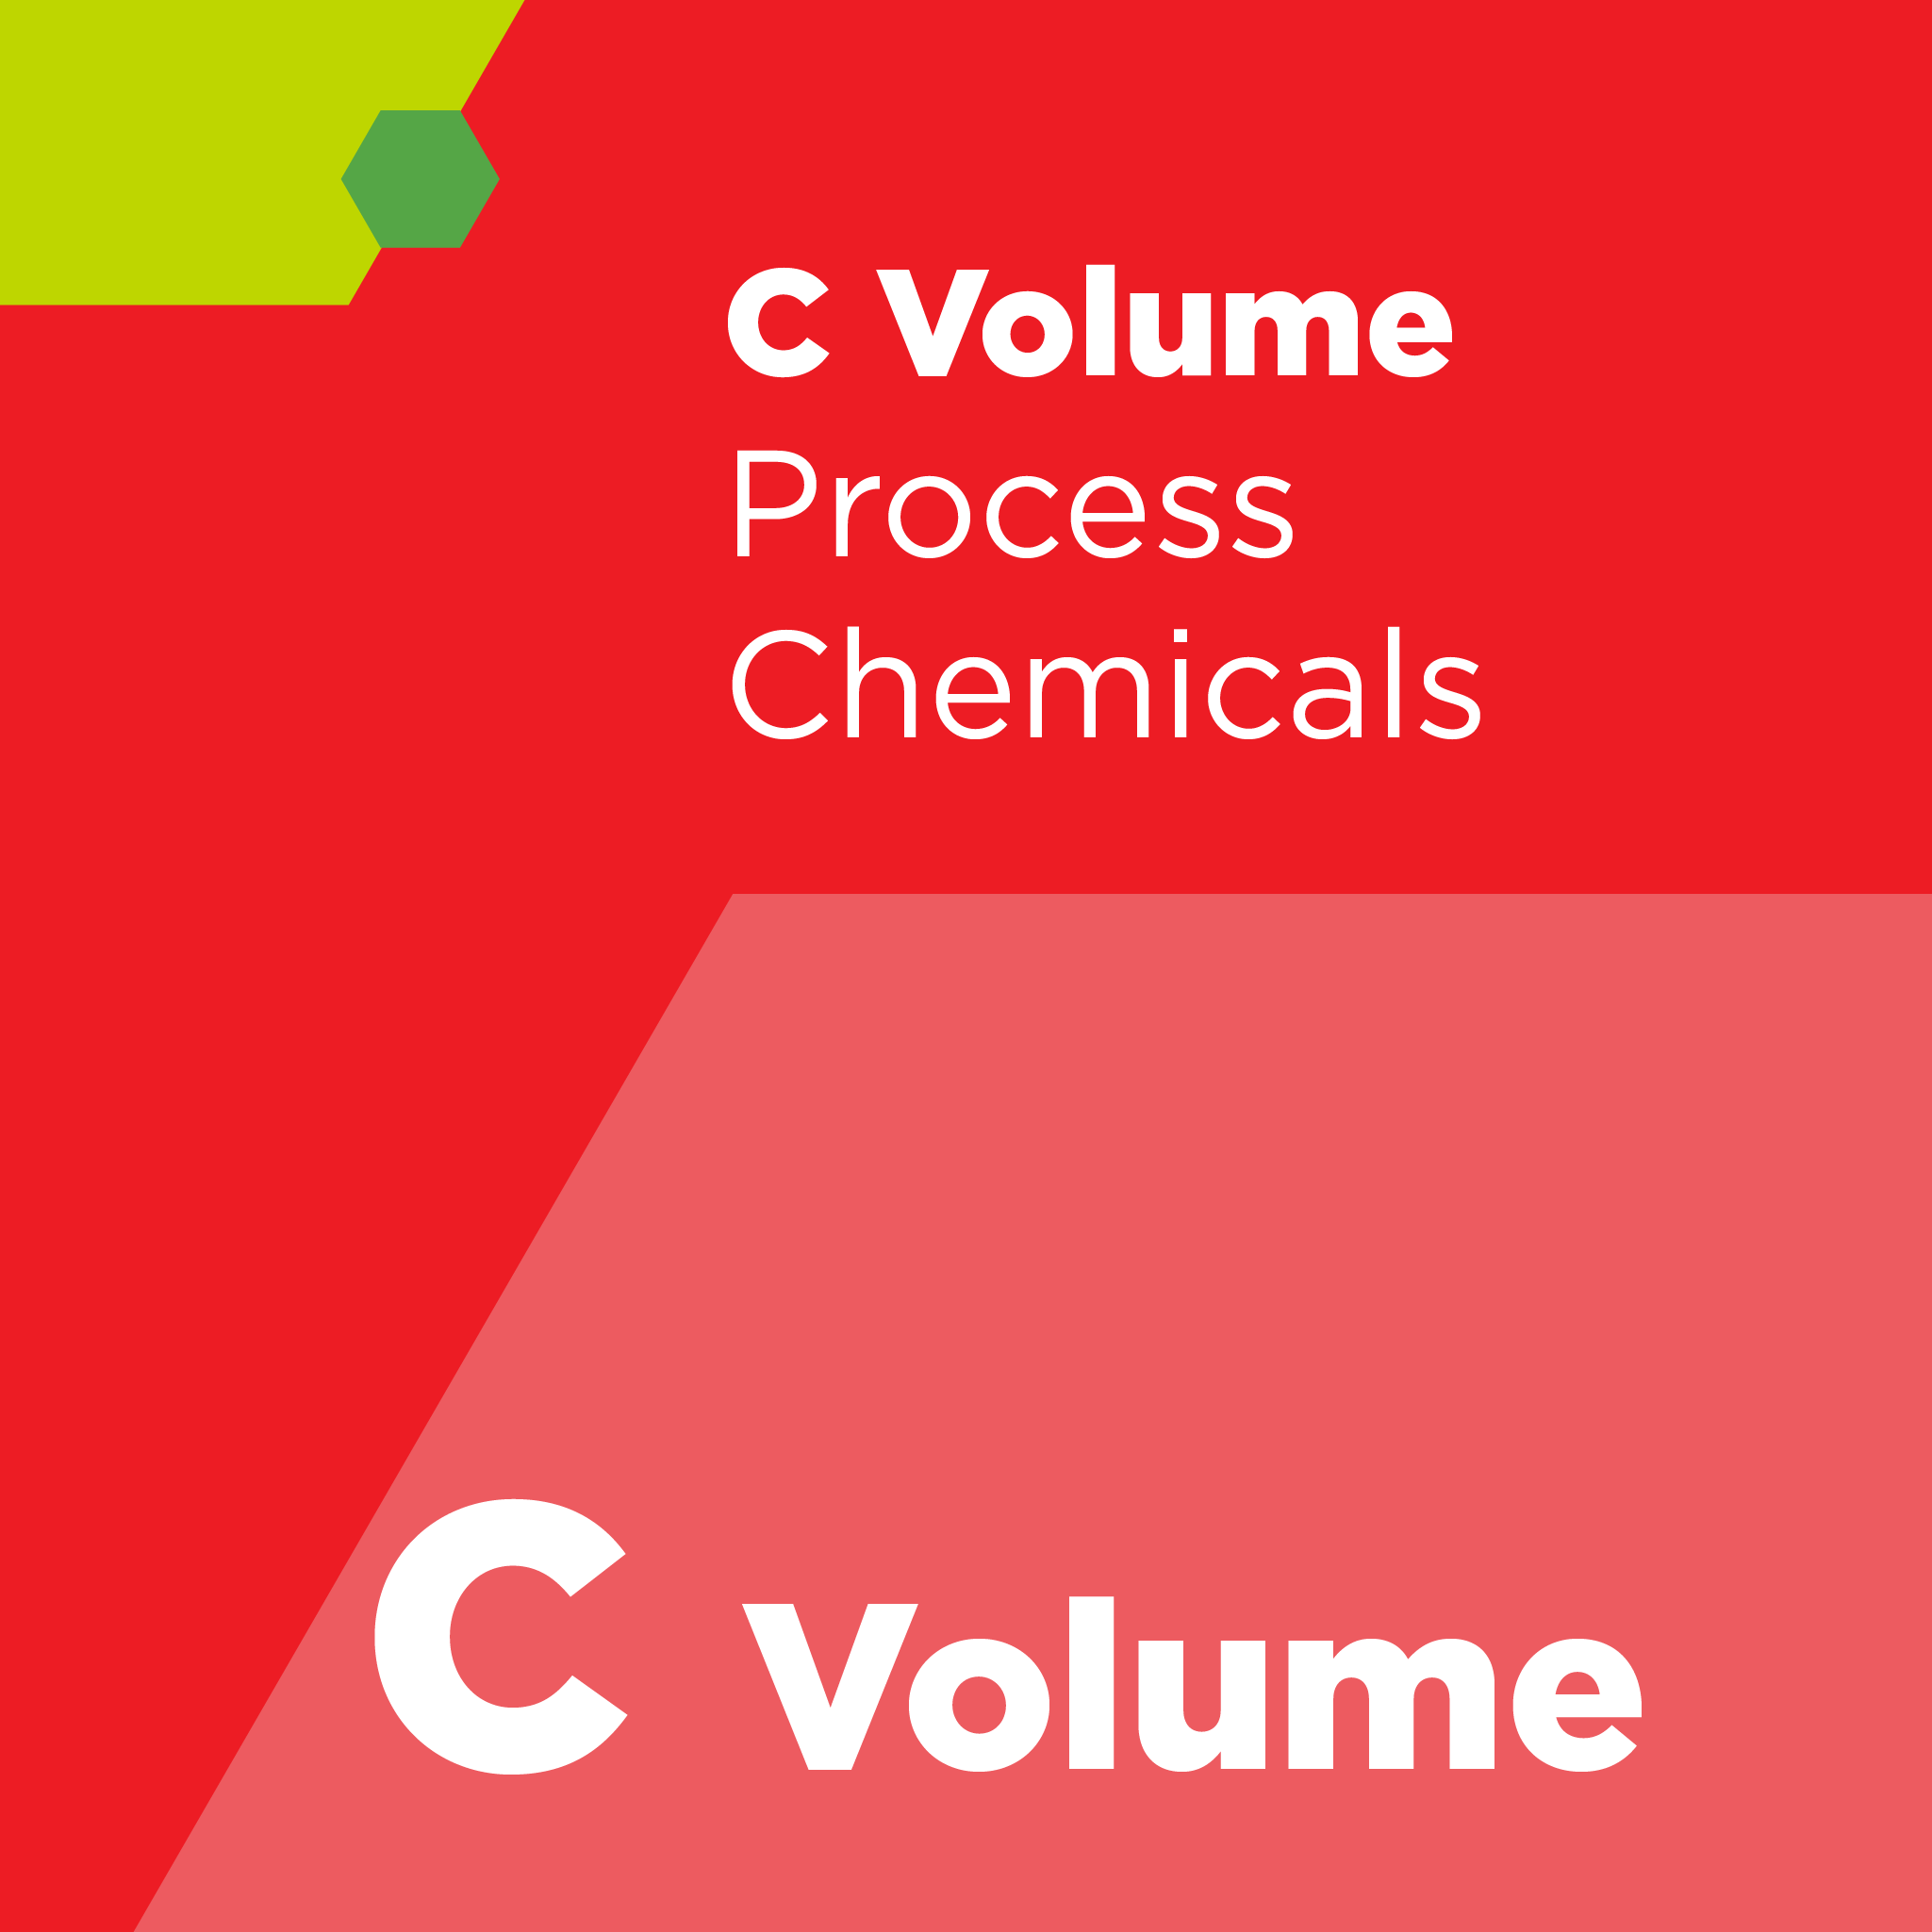 C10500 - SEMI C105 - Guide for Trace Iron Analysis in High Purity 2-Propanol (IPA)